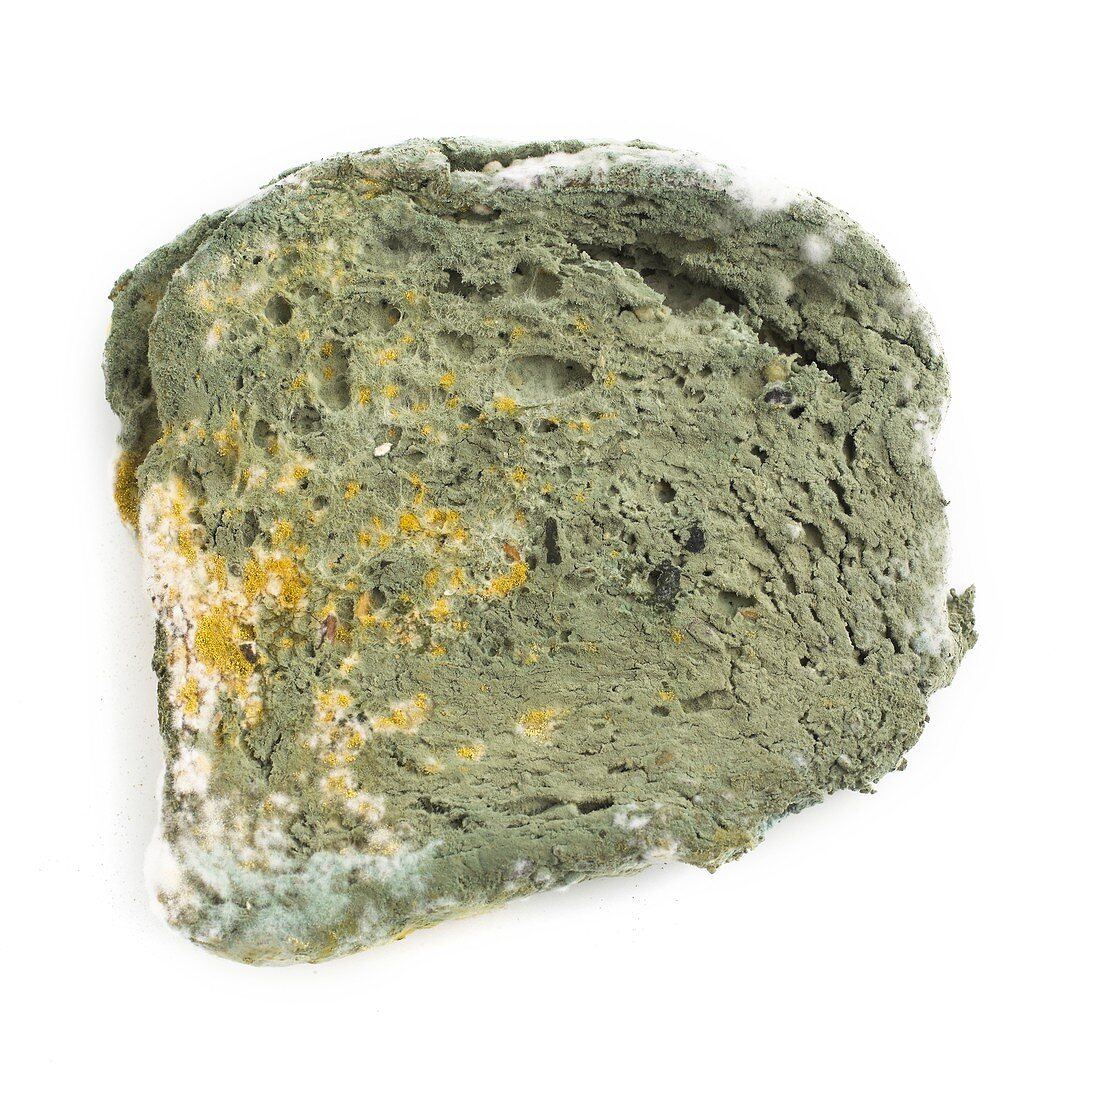 Mould on bread